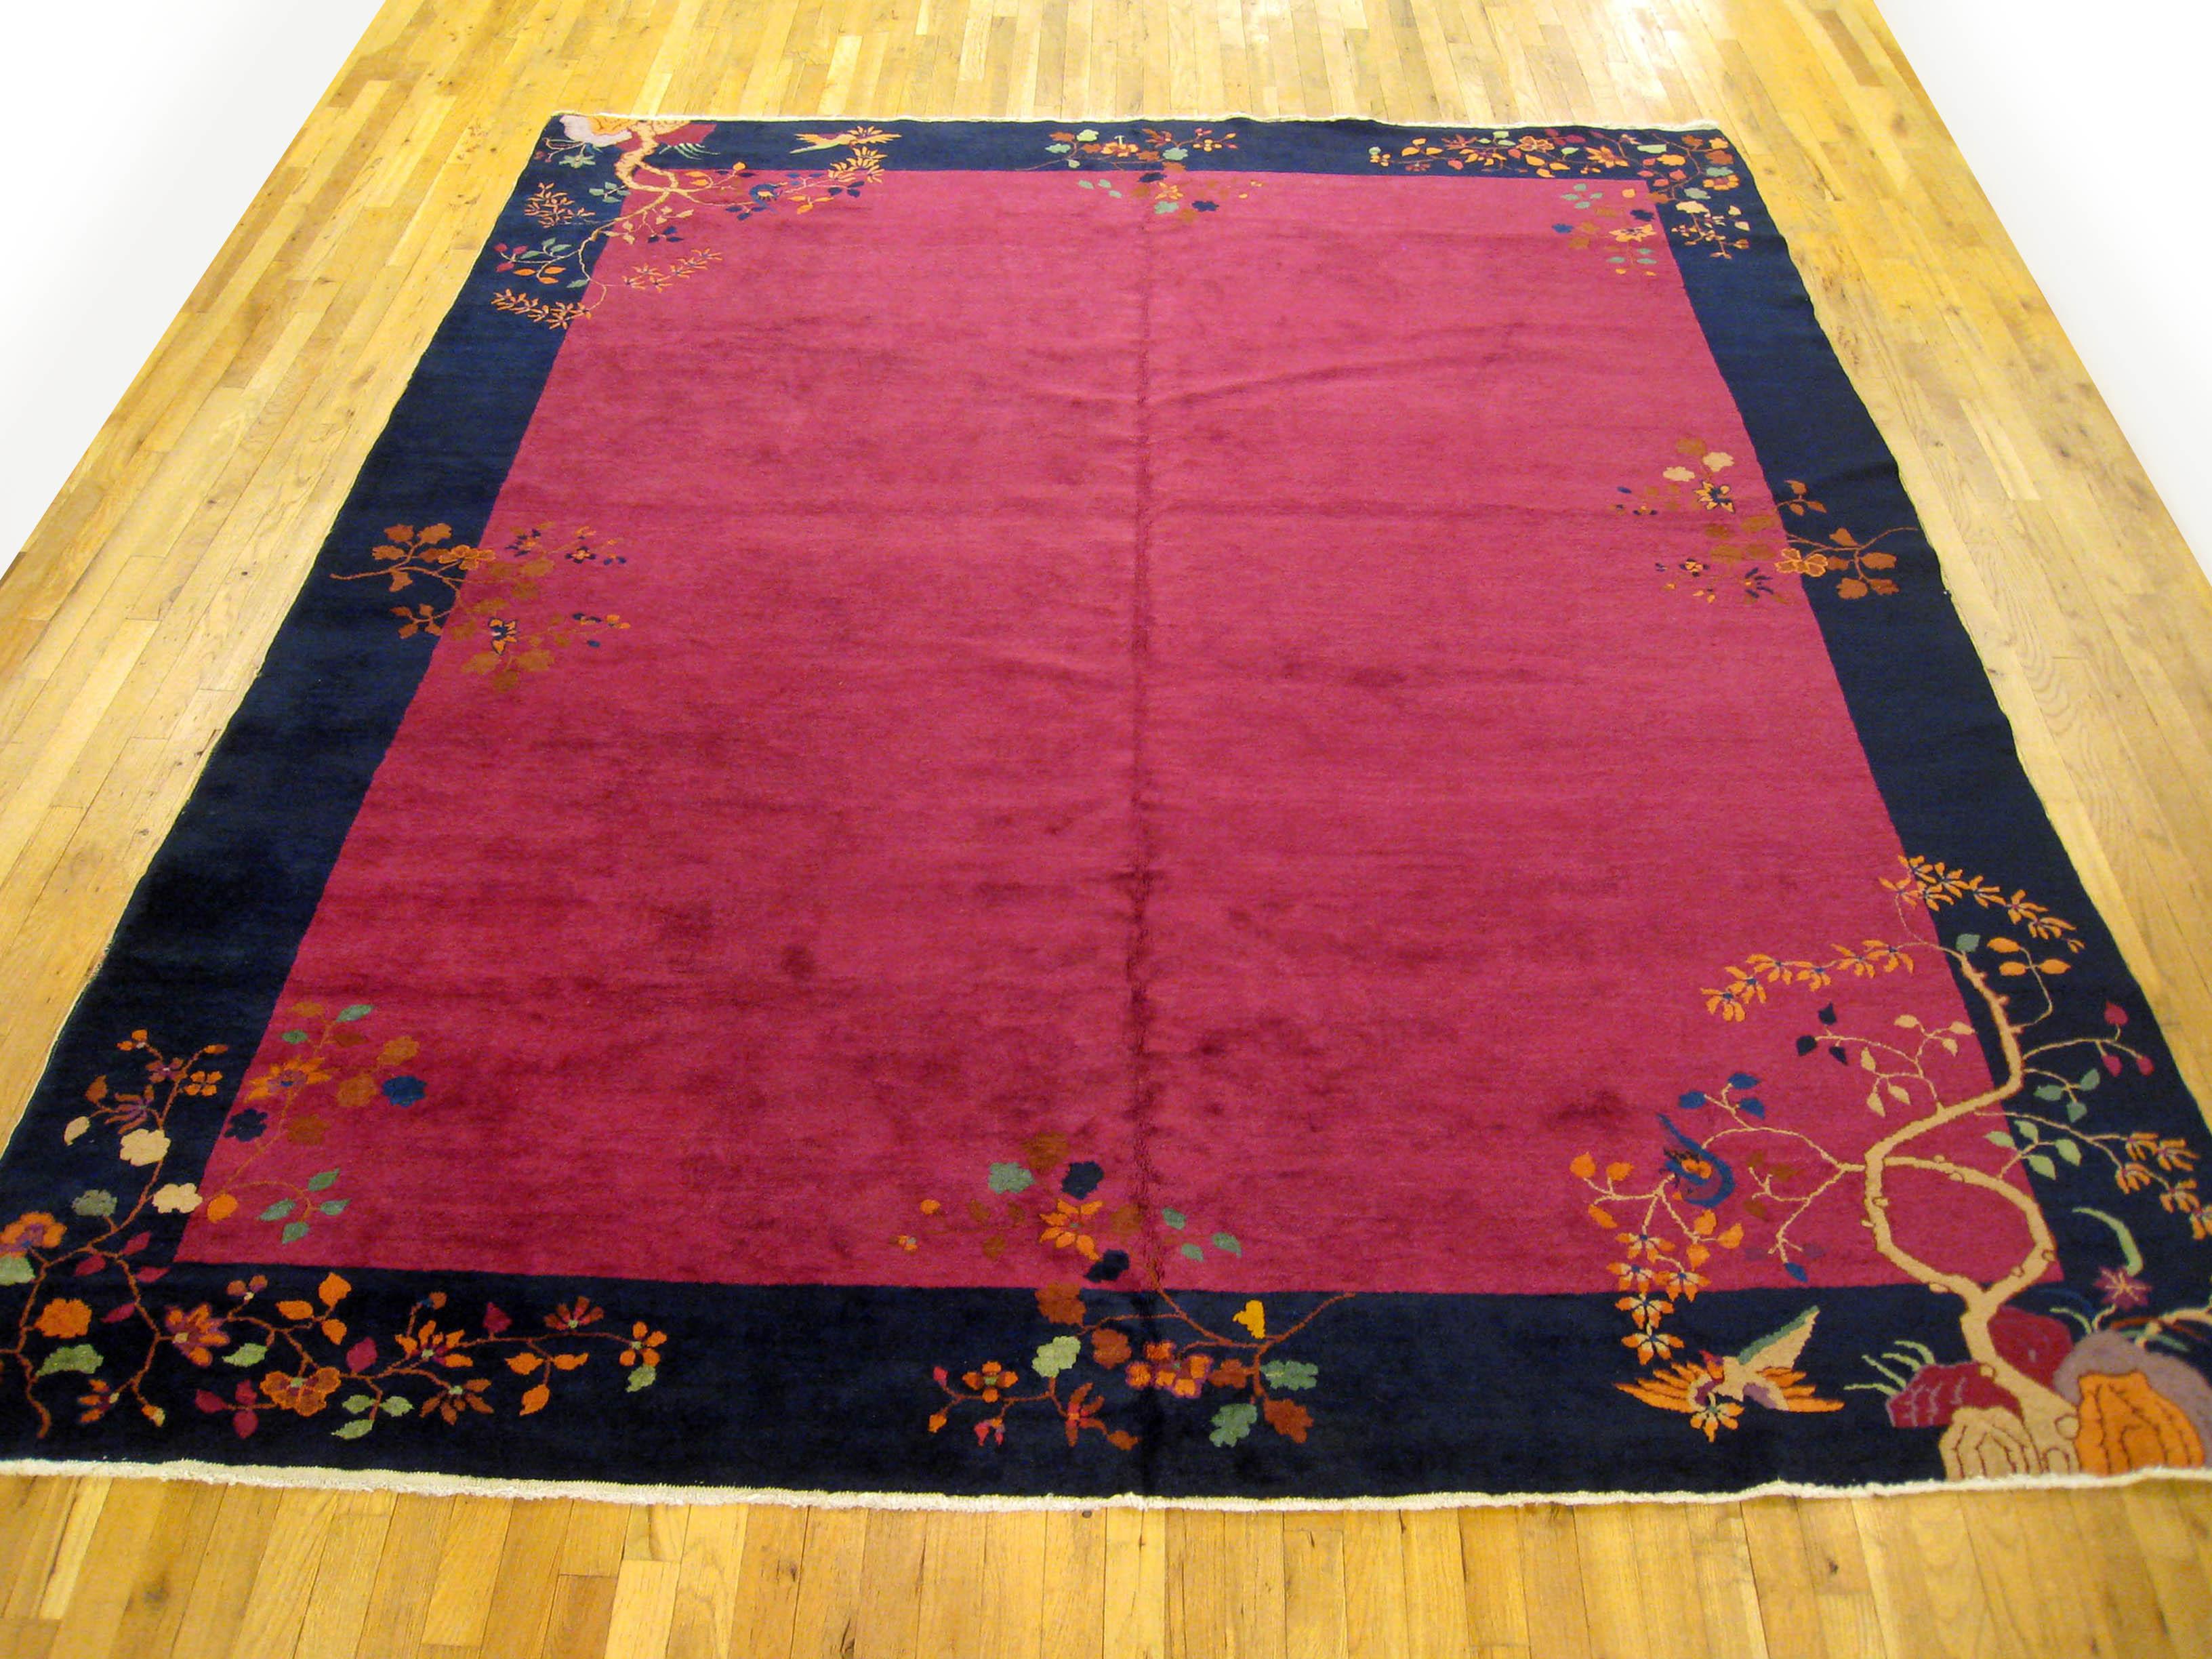 Antique Chinese Art deco Rug, Room size, circa 1920

A one-of-a-kind antique Chinese Mandarin oriental carpet, hand-knotted with medium thickness wool pile. This beautiful rug features art deco motifs allover a large purple red open field, with  a